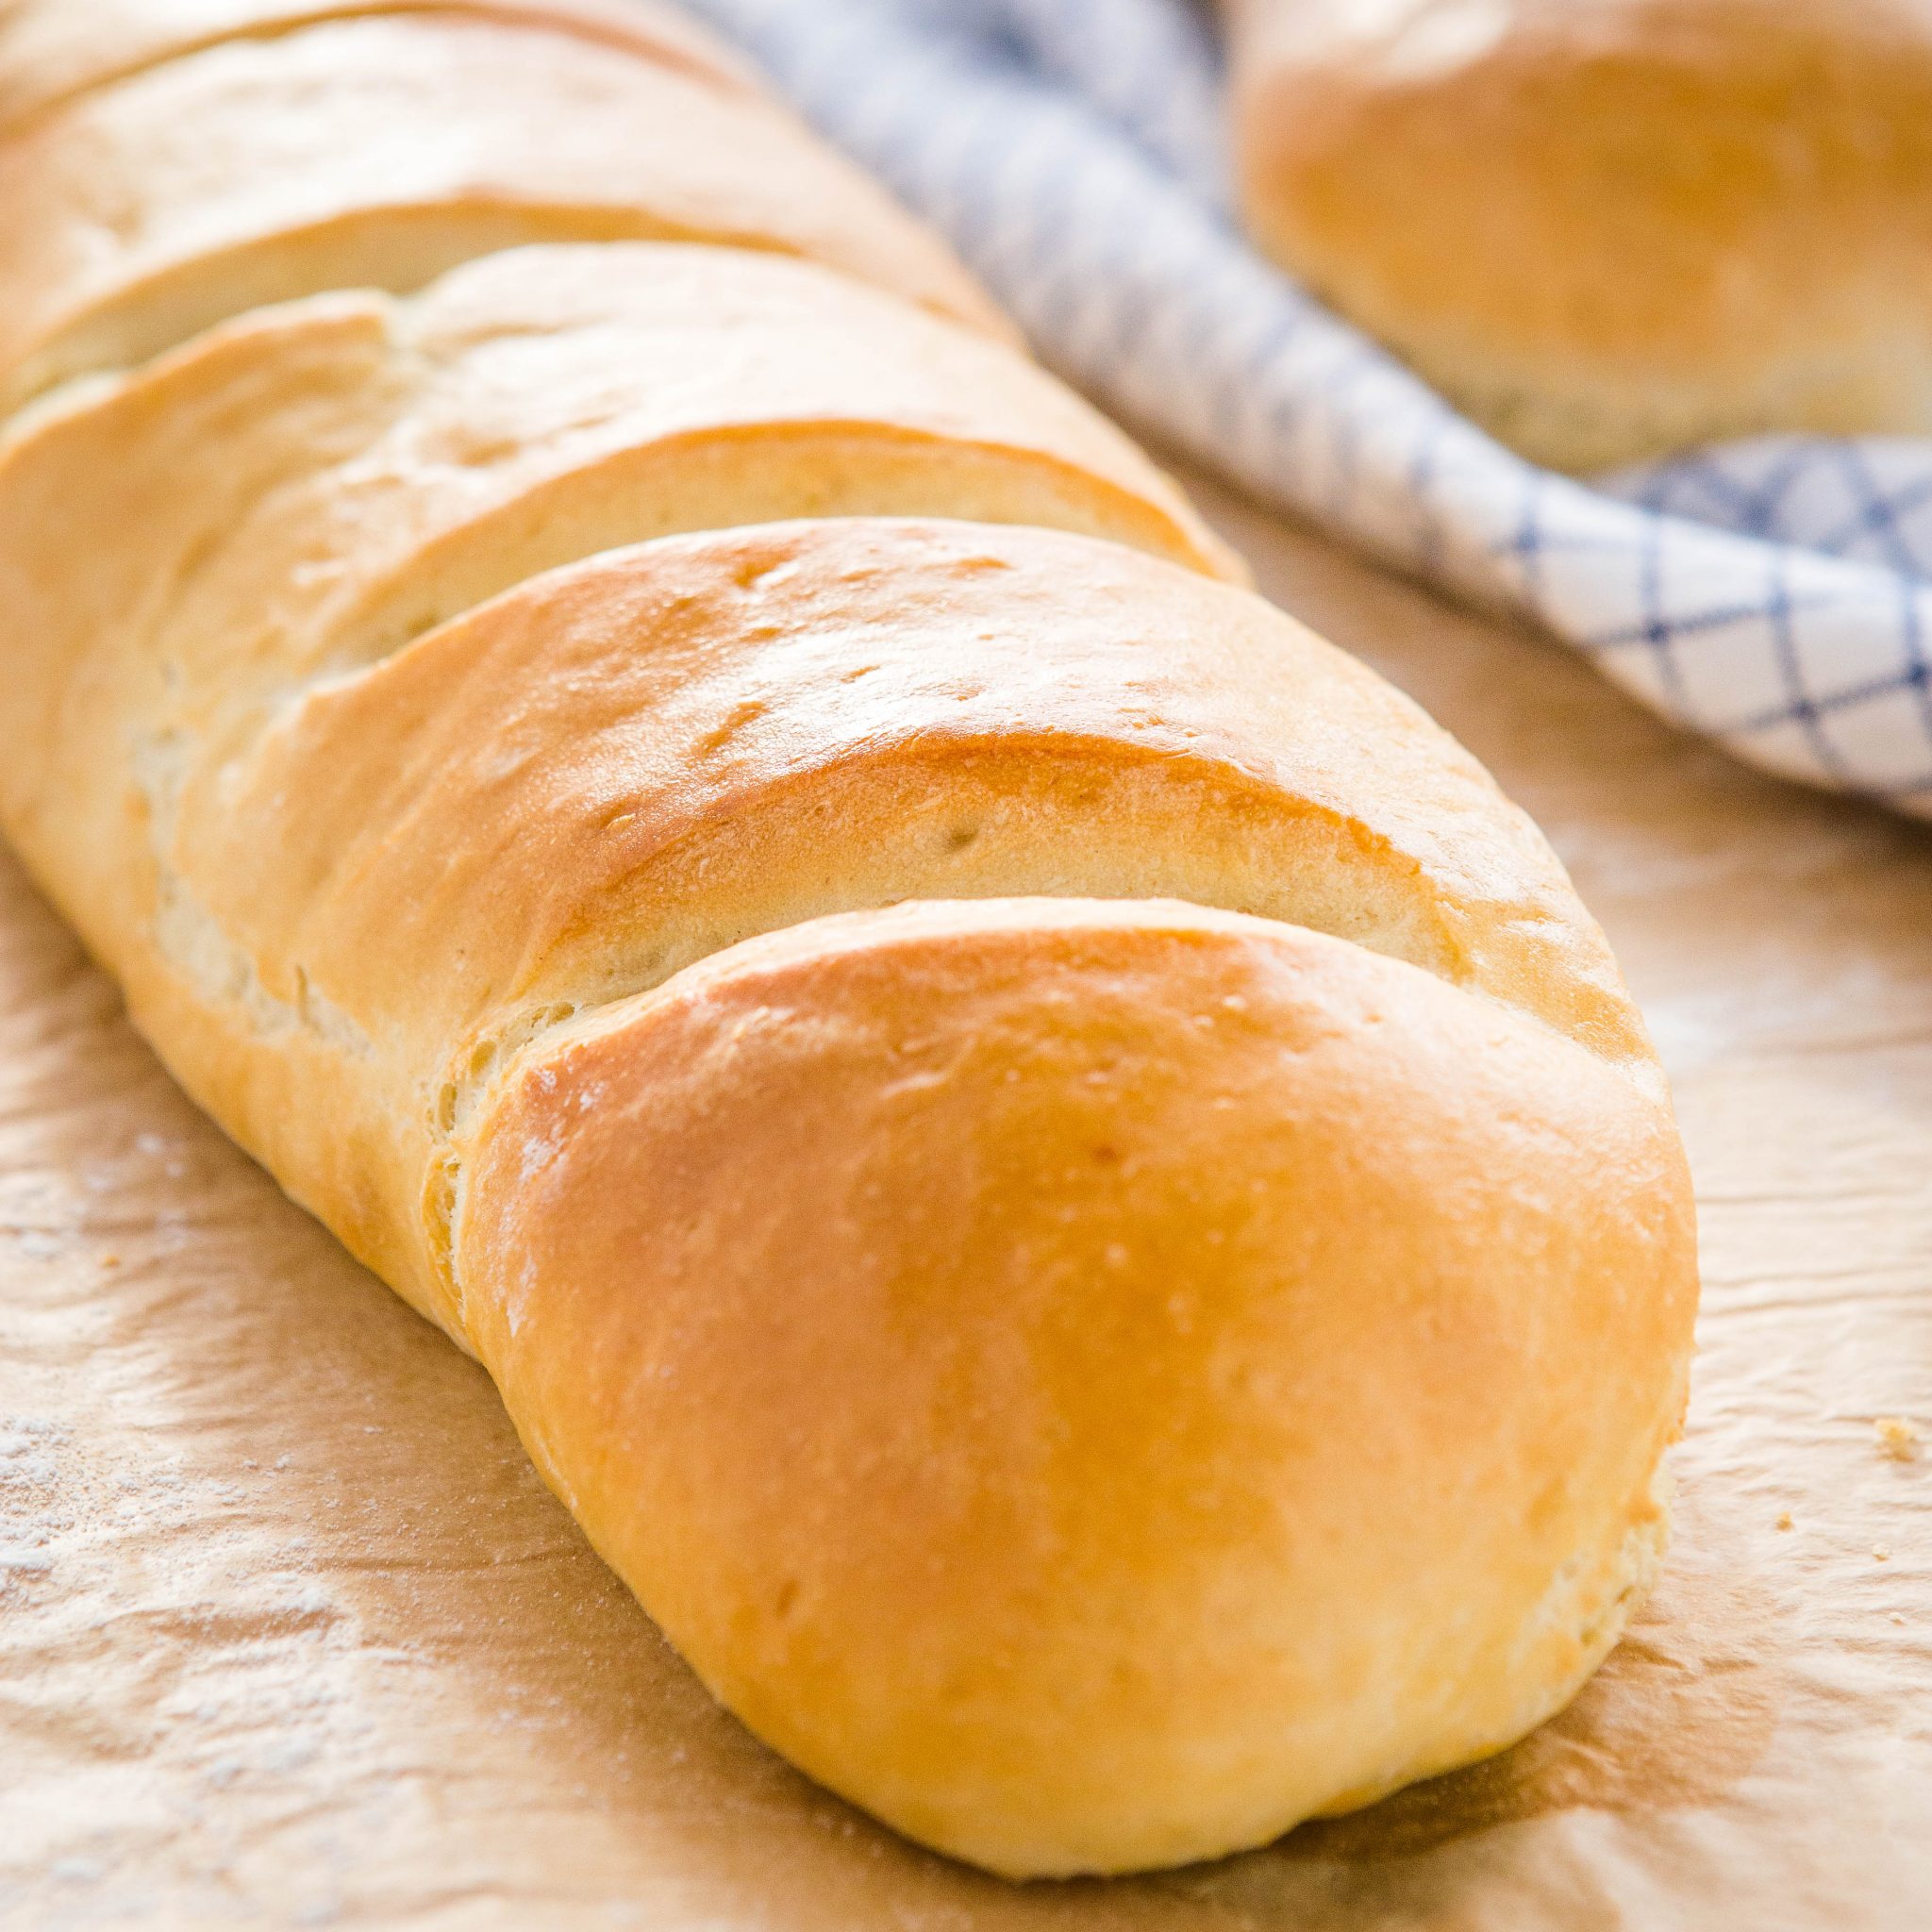 https://thebusybaker.ca/wp-content/uploads/2021/02/easy-french-bread-fb-ig-3-scaled.jpg